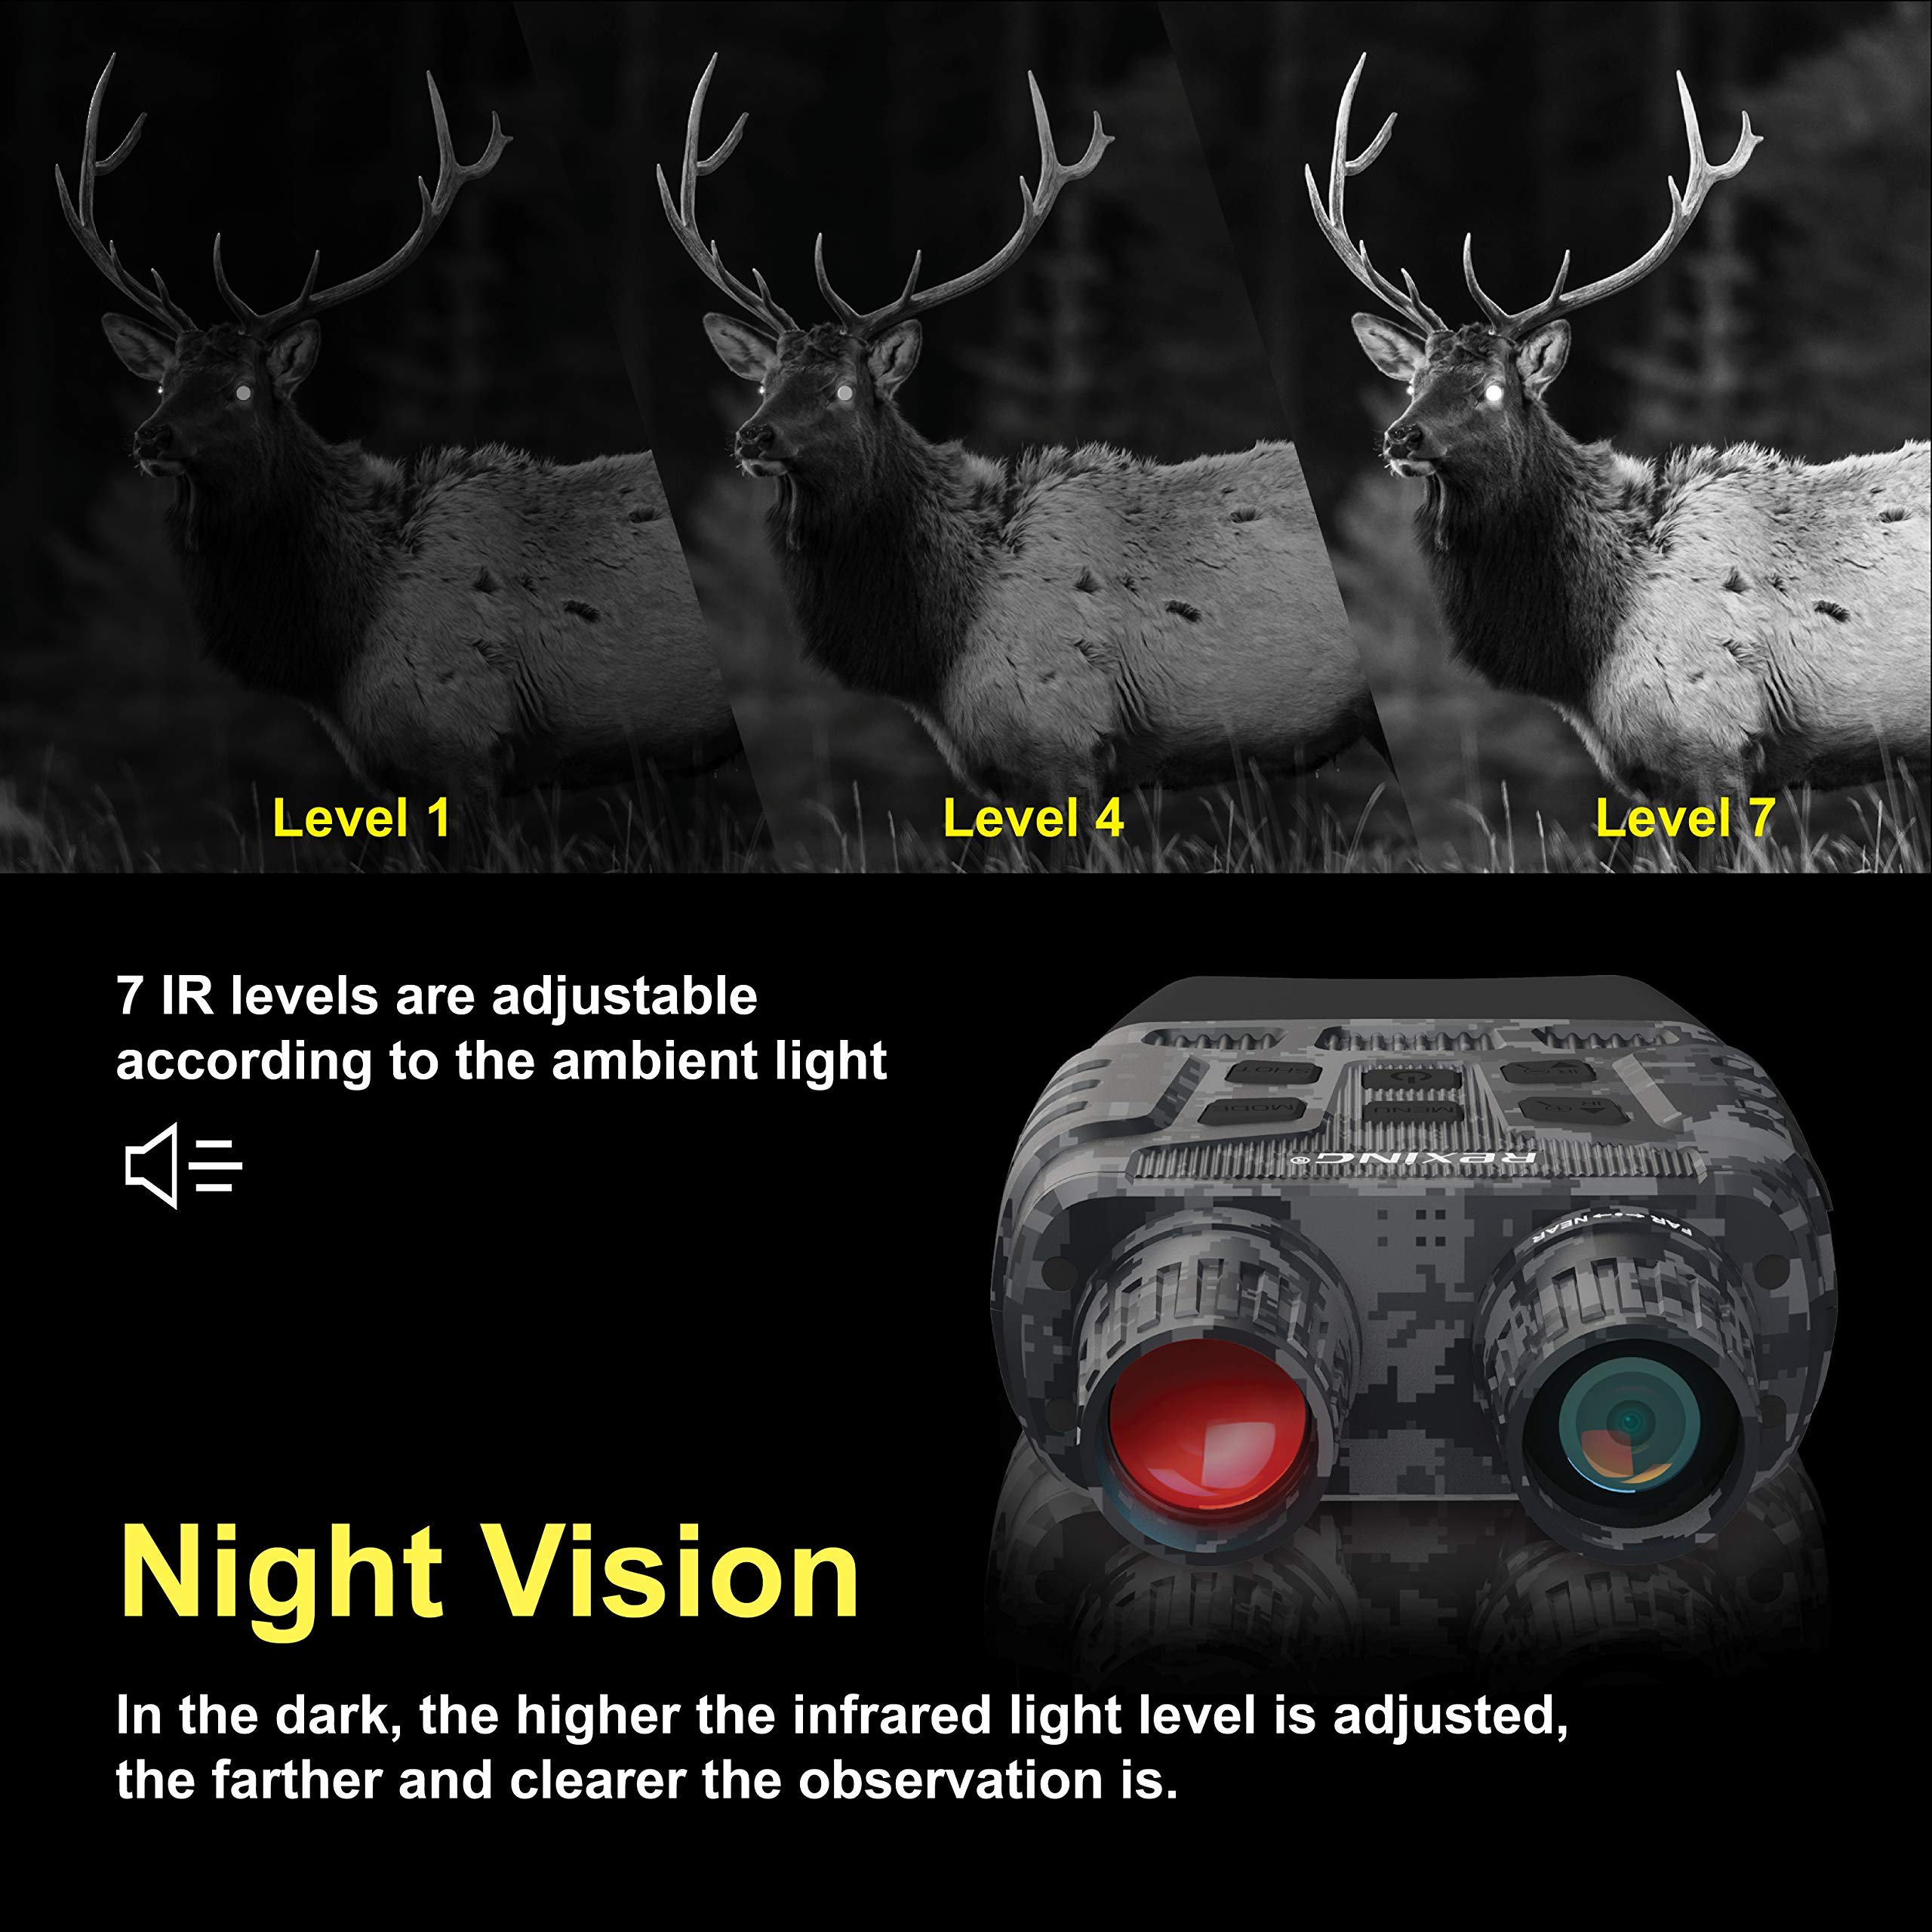 REXING B1 (Digital Camo) Night Vision Goggles Binoculars with LCD Screen,Infrared (IR) Digital Camera,Dual Photo + Video Recording for Spotting,Hunting,Tracking up to 300 Meters,Rexing-B1-DC